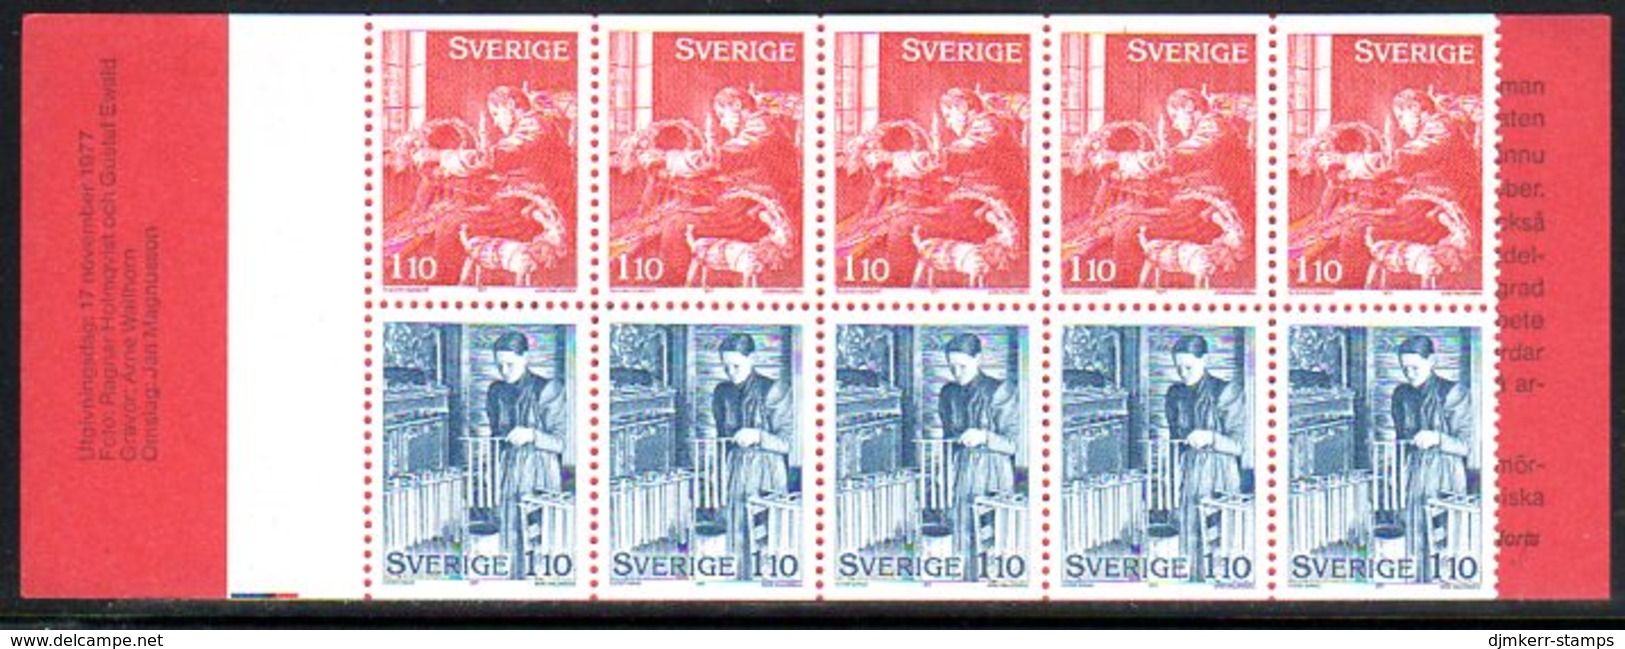 SWEDEN 1977 Christmas Booklets MNH / **. Michel MH64-65 - 1951-80